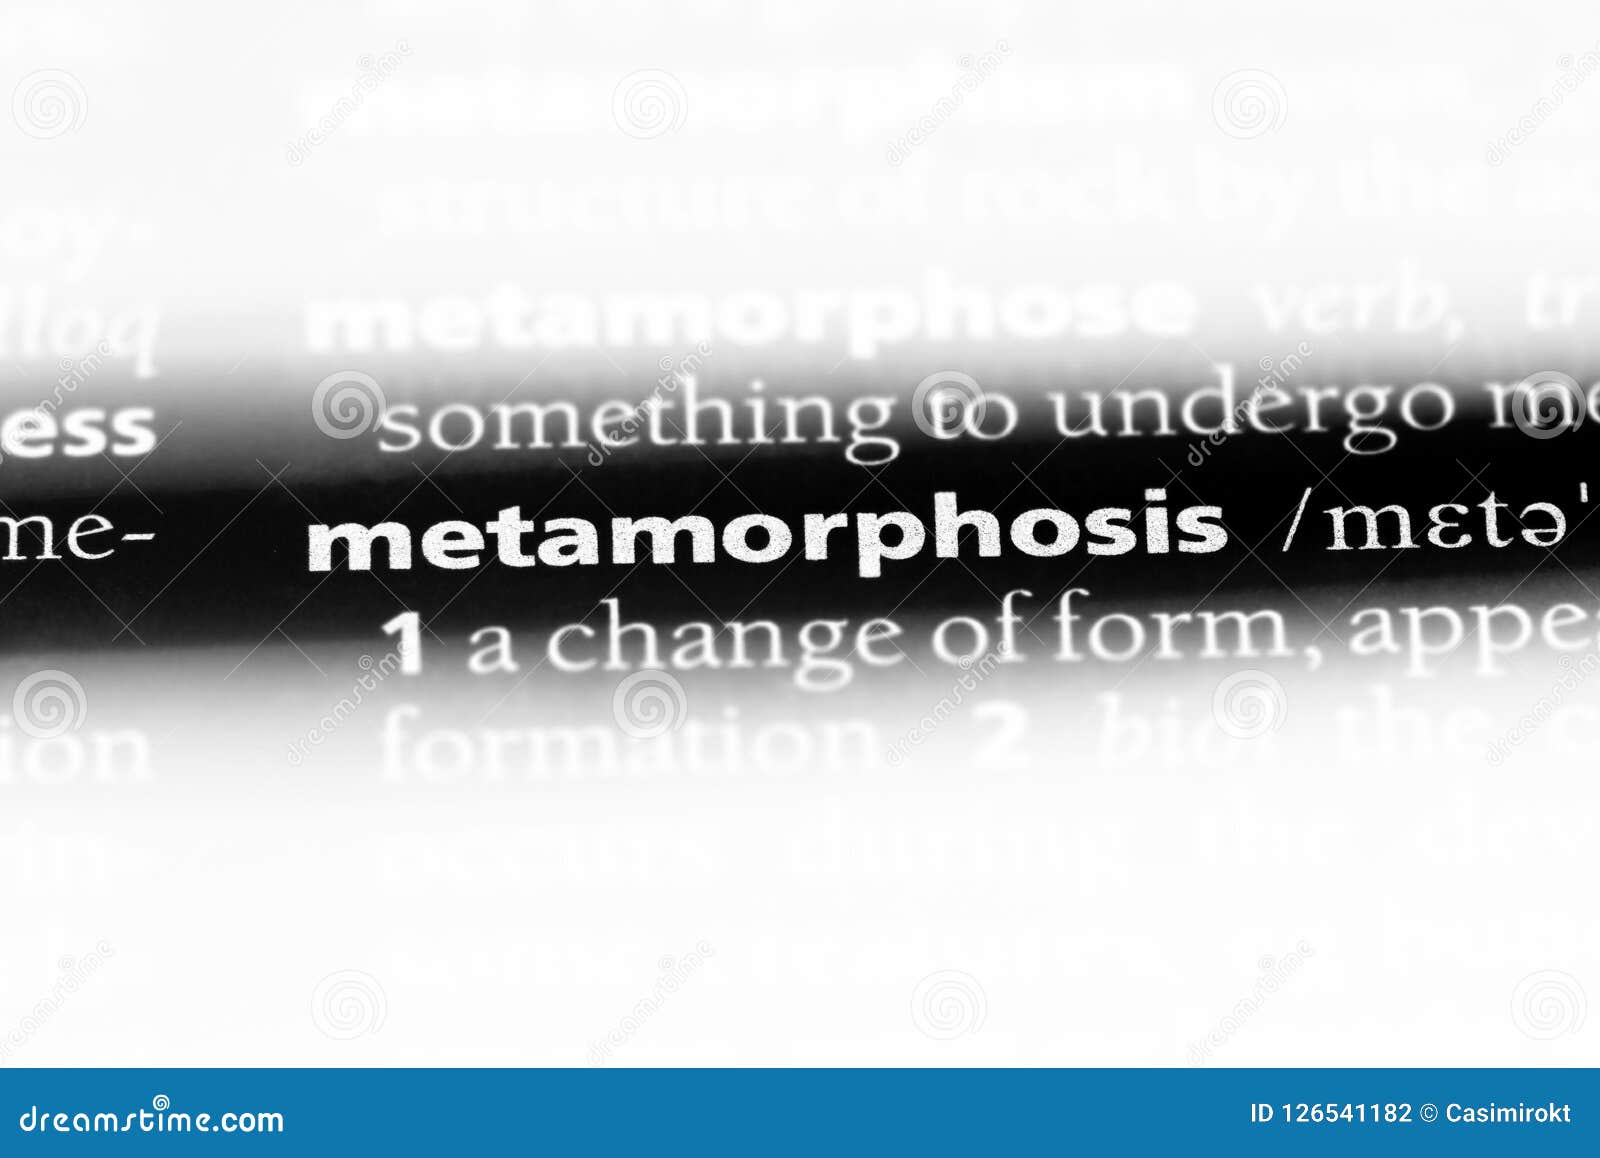 English research paper the metamorphosis